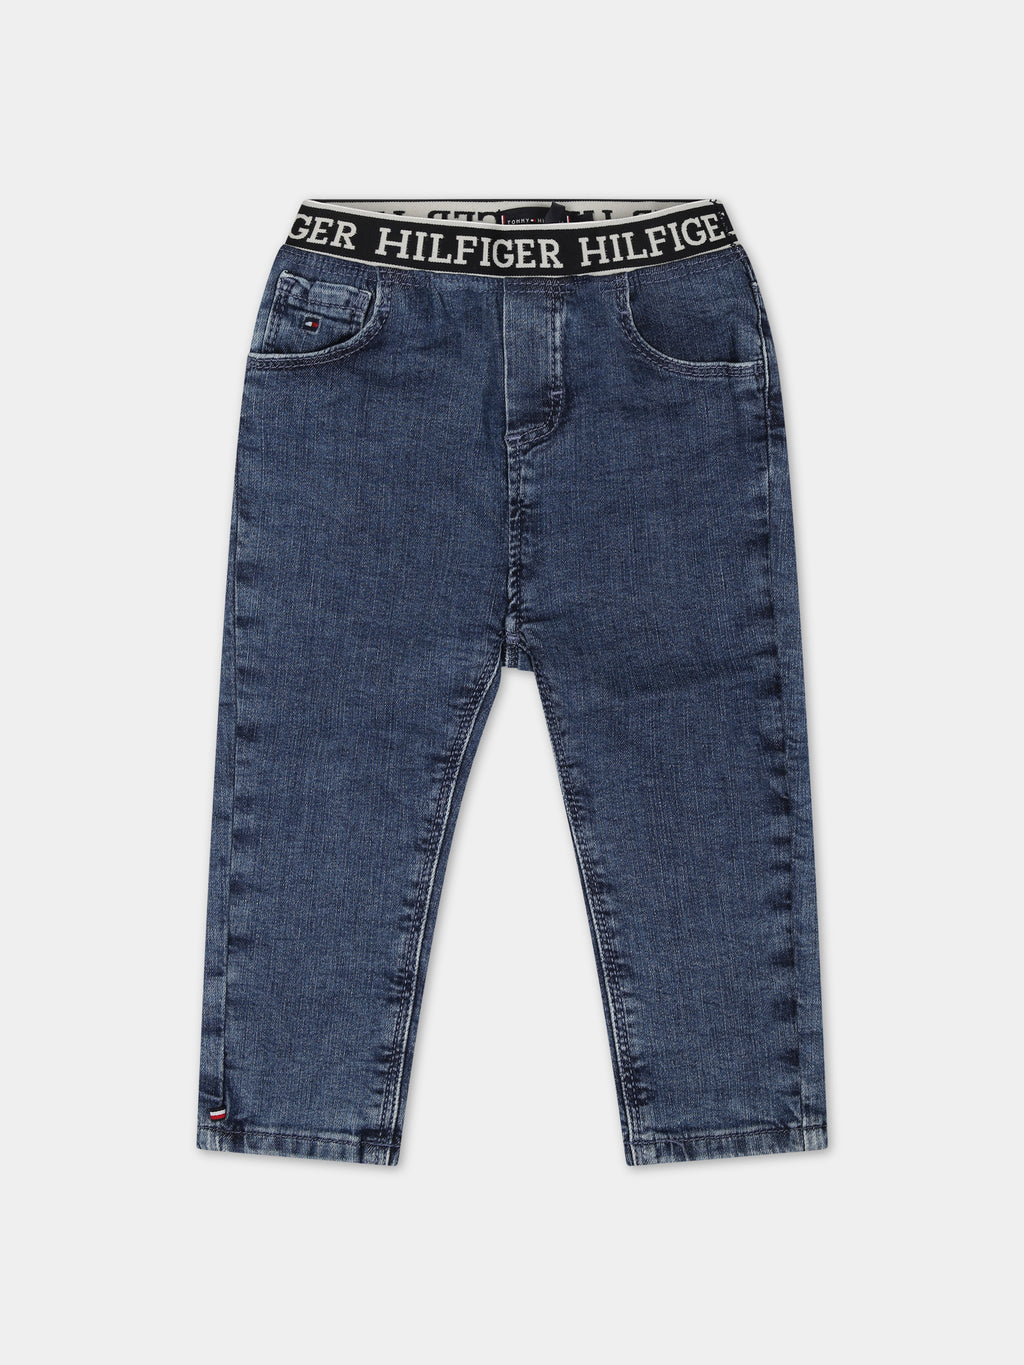 Denim jeans for babies with logo